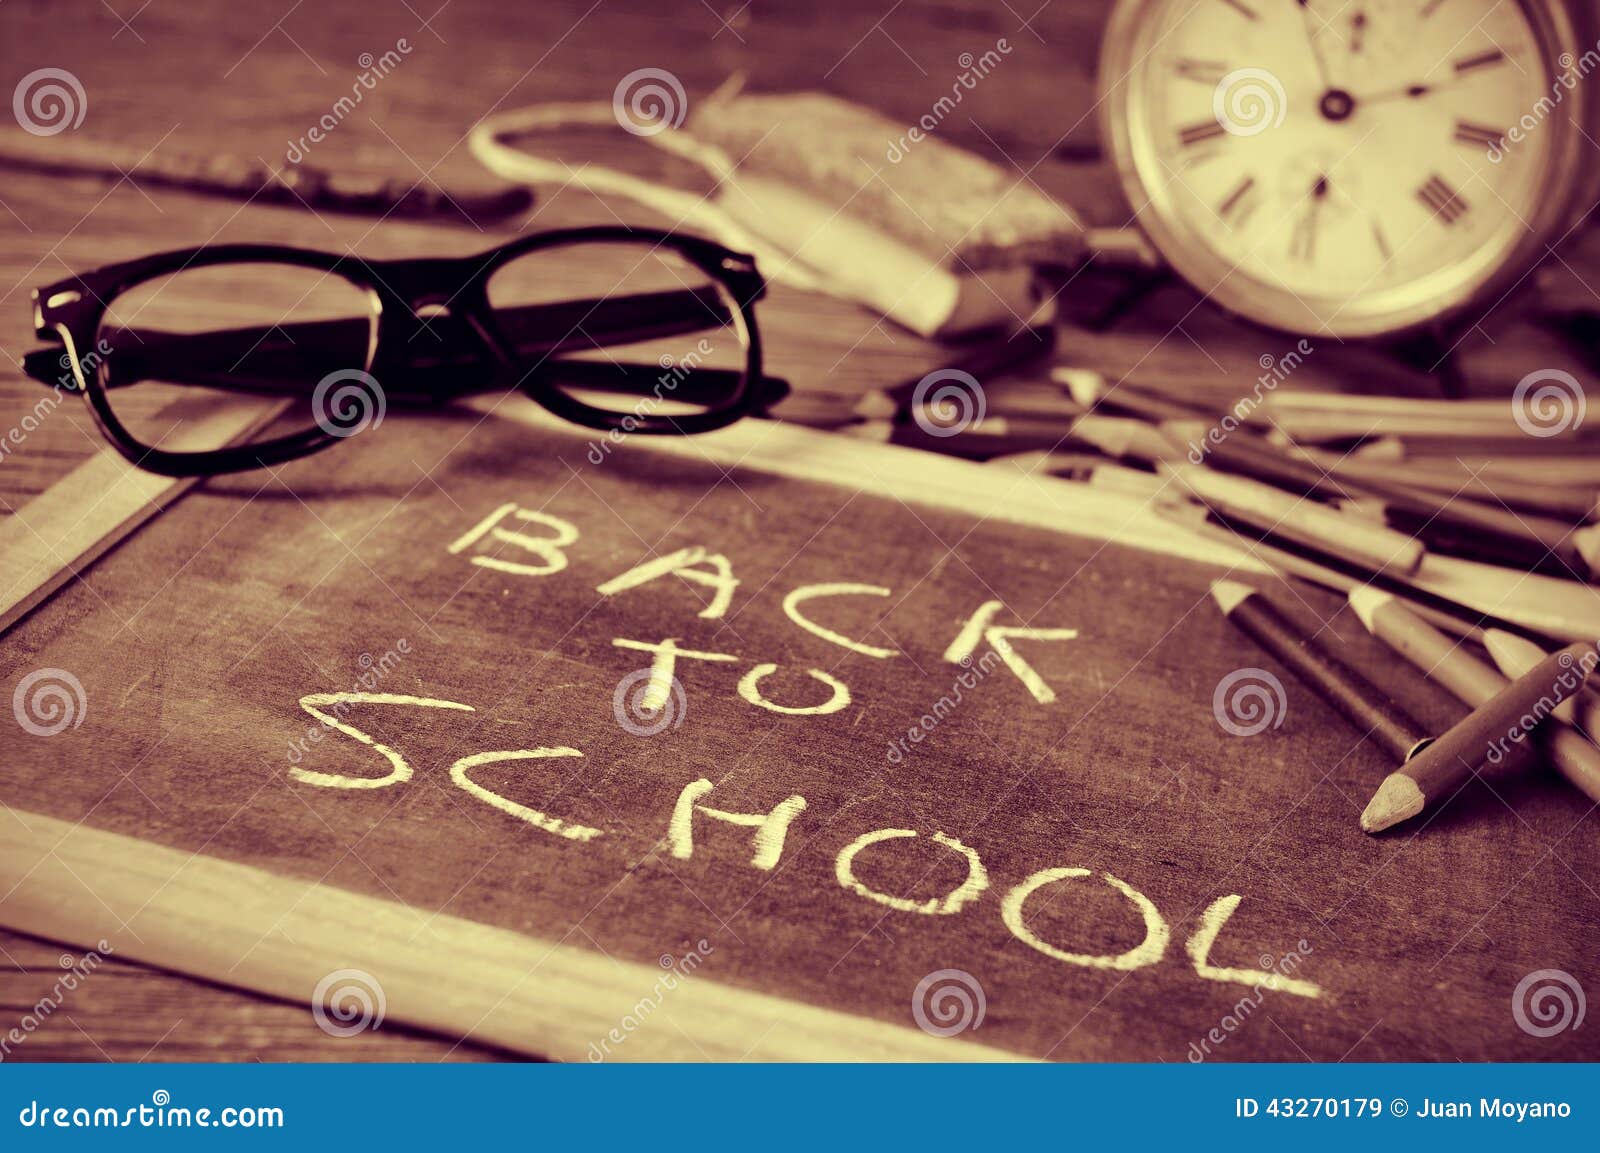 back to school in duotone